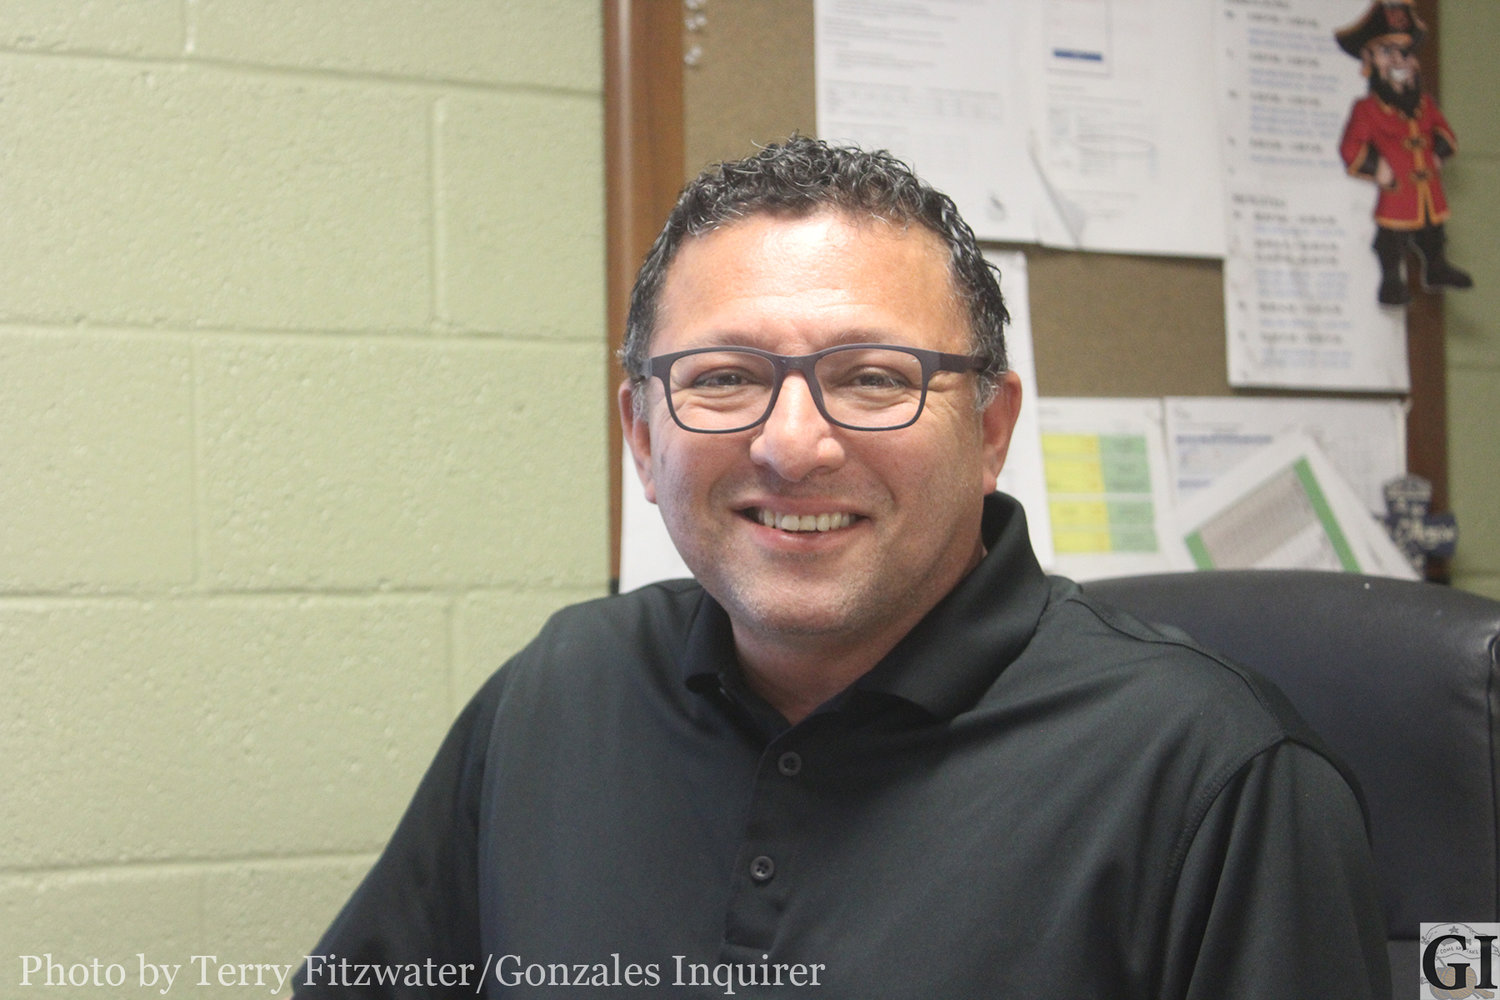 Vince Ortiz has taken over as the new Victoria College Gonzales Center manager as of Oct. 1. Ortiz succeeds Jackie Mikesh, who retired at the end of September.